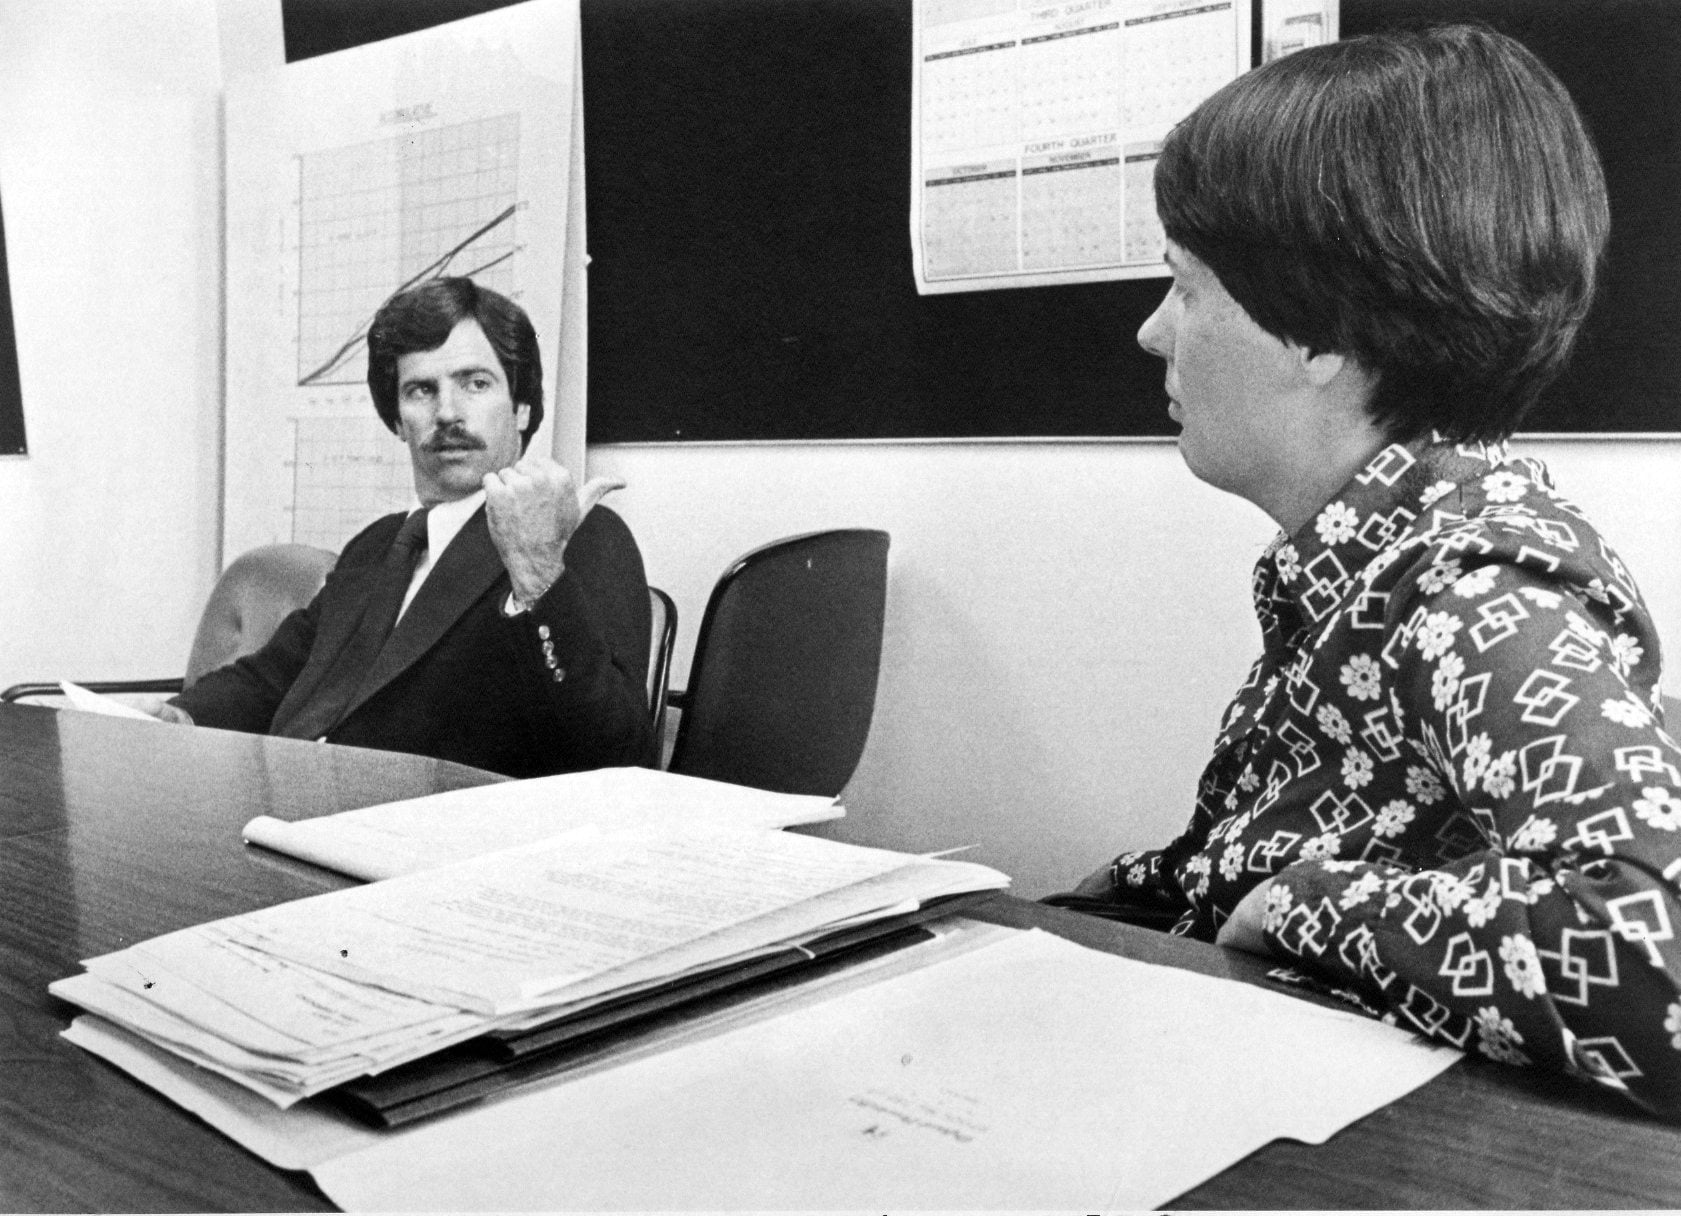 County Commissioners John McKibbin and Connie Kearney at a meeting in 1979.